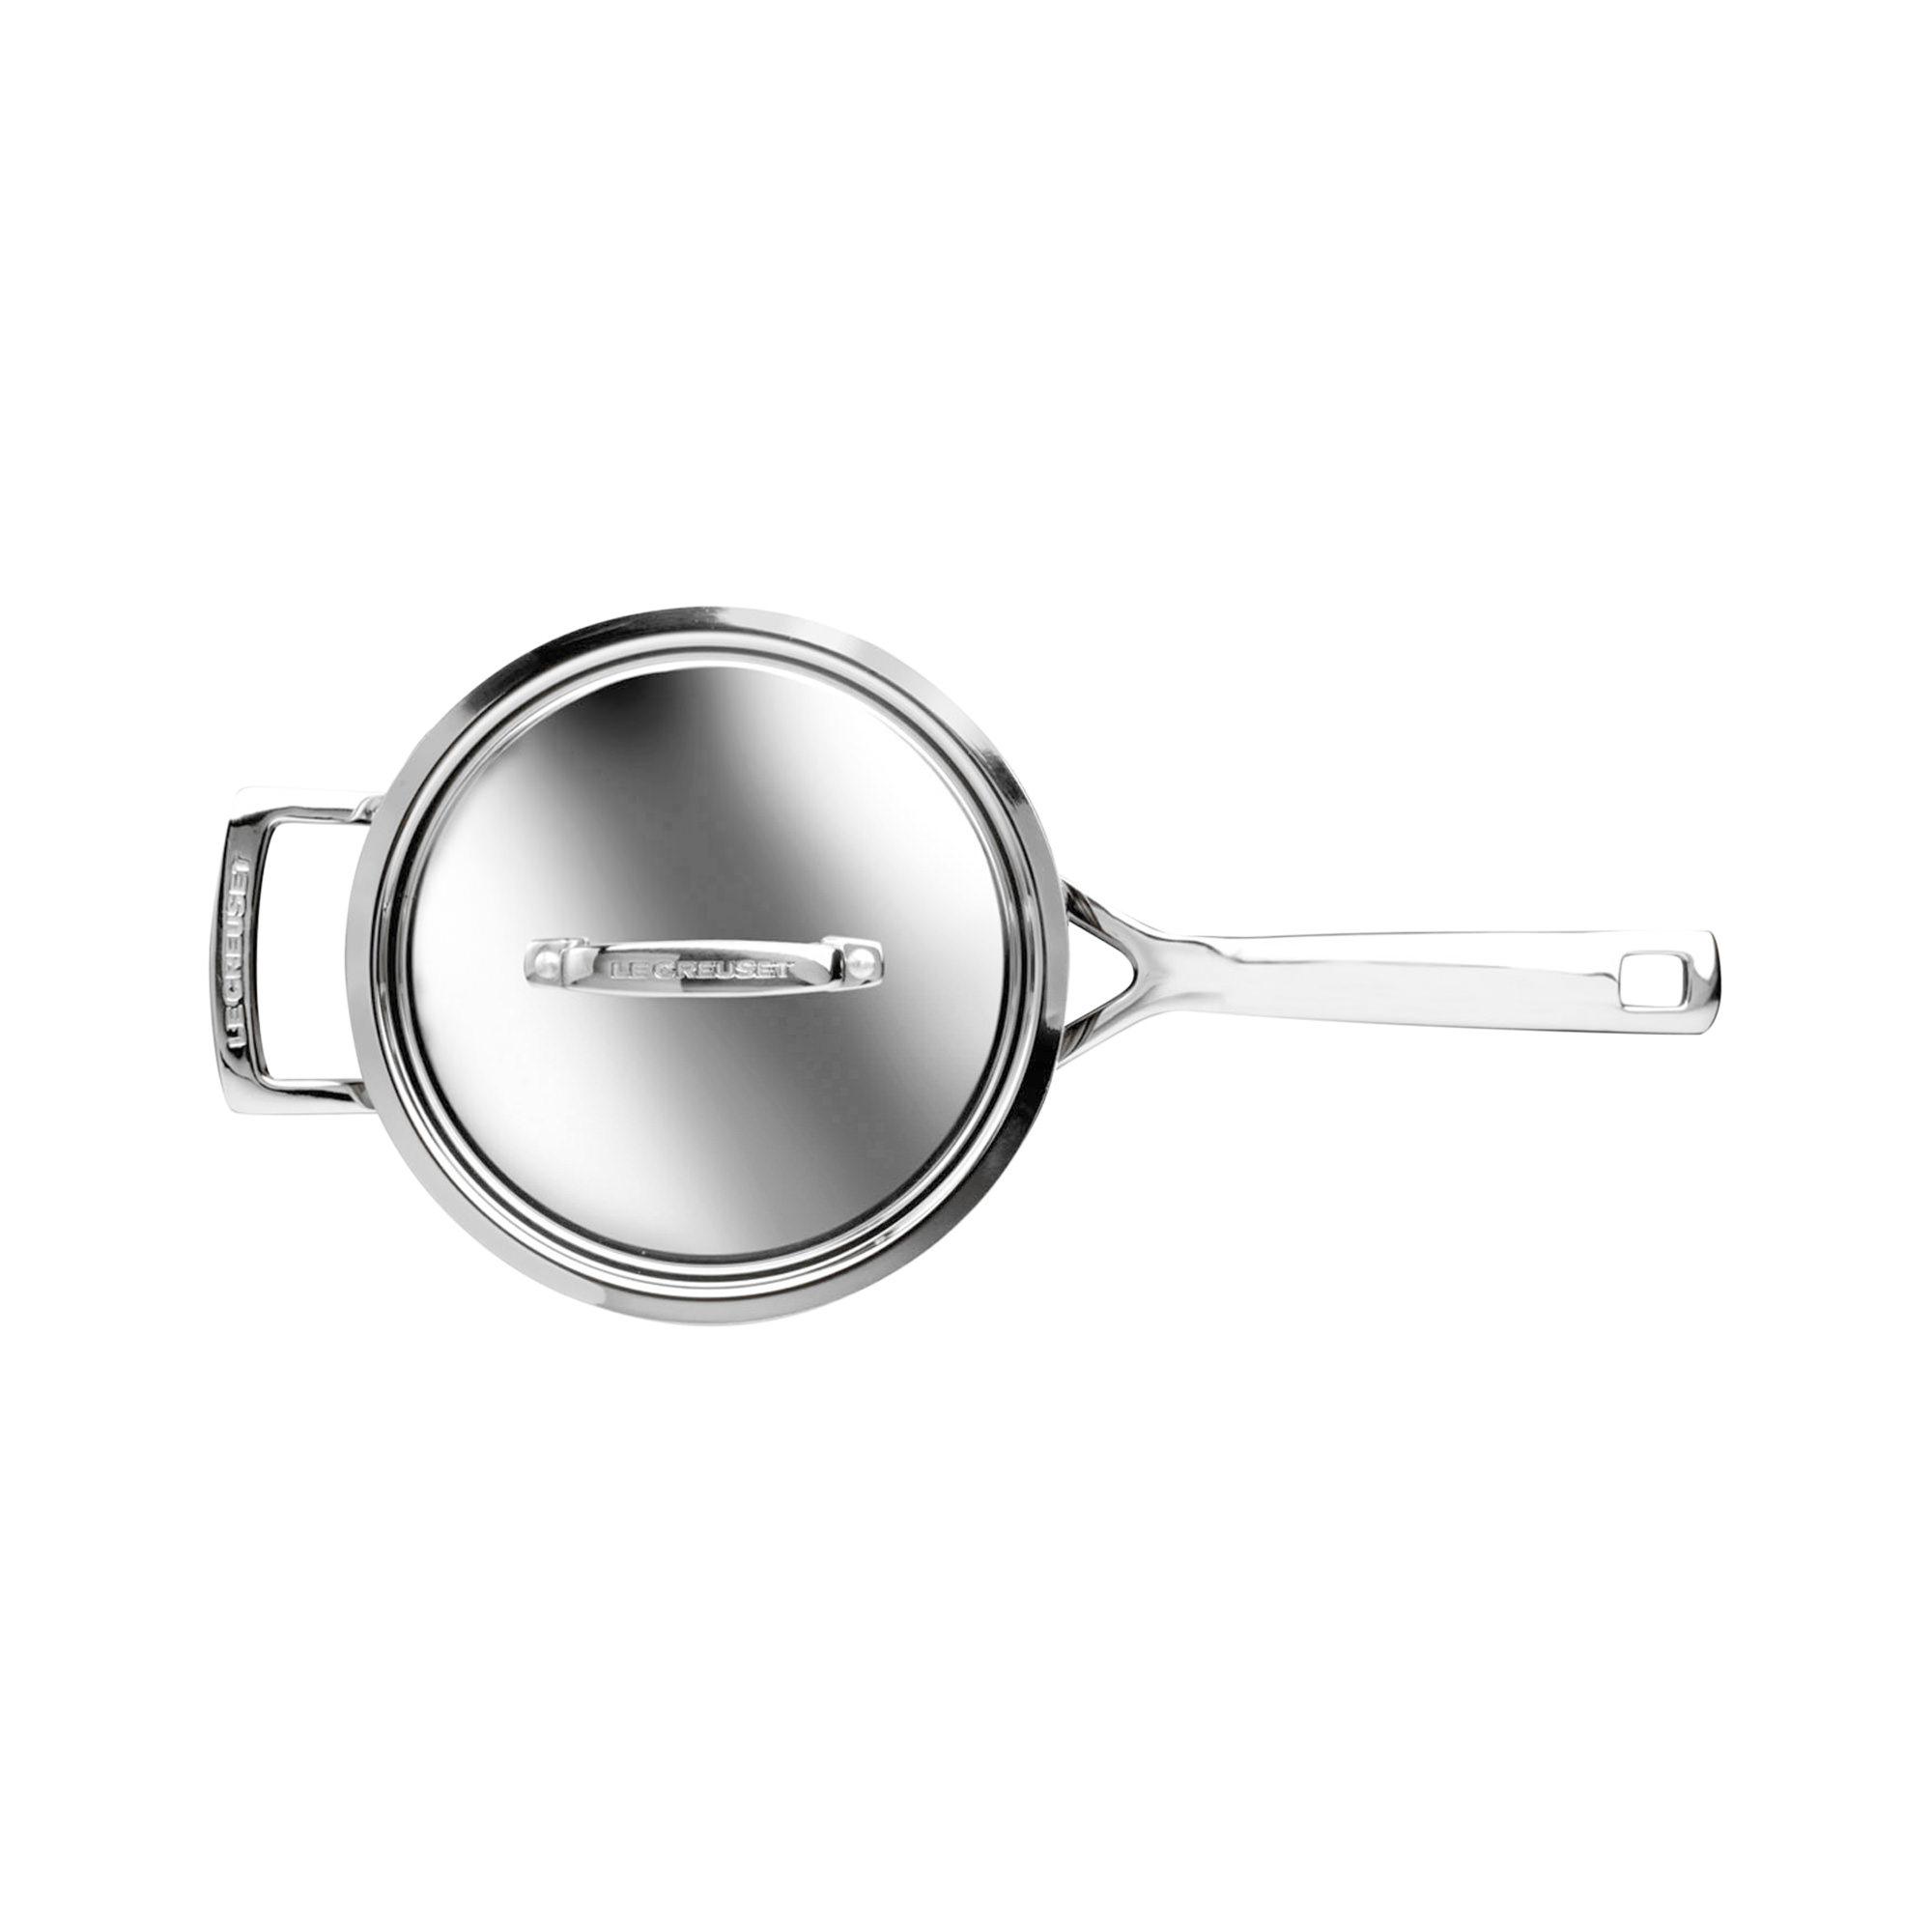 Le Creuset 3-Ply Stainless Steel Saucepan with Lid 16cm - 1.9L Image 2